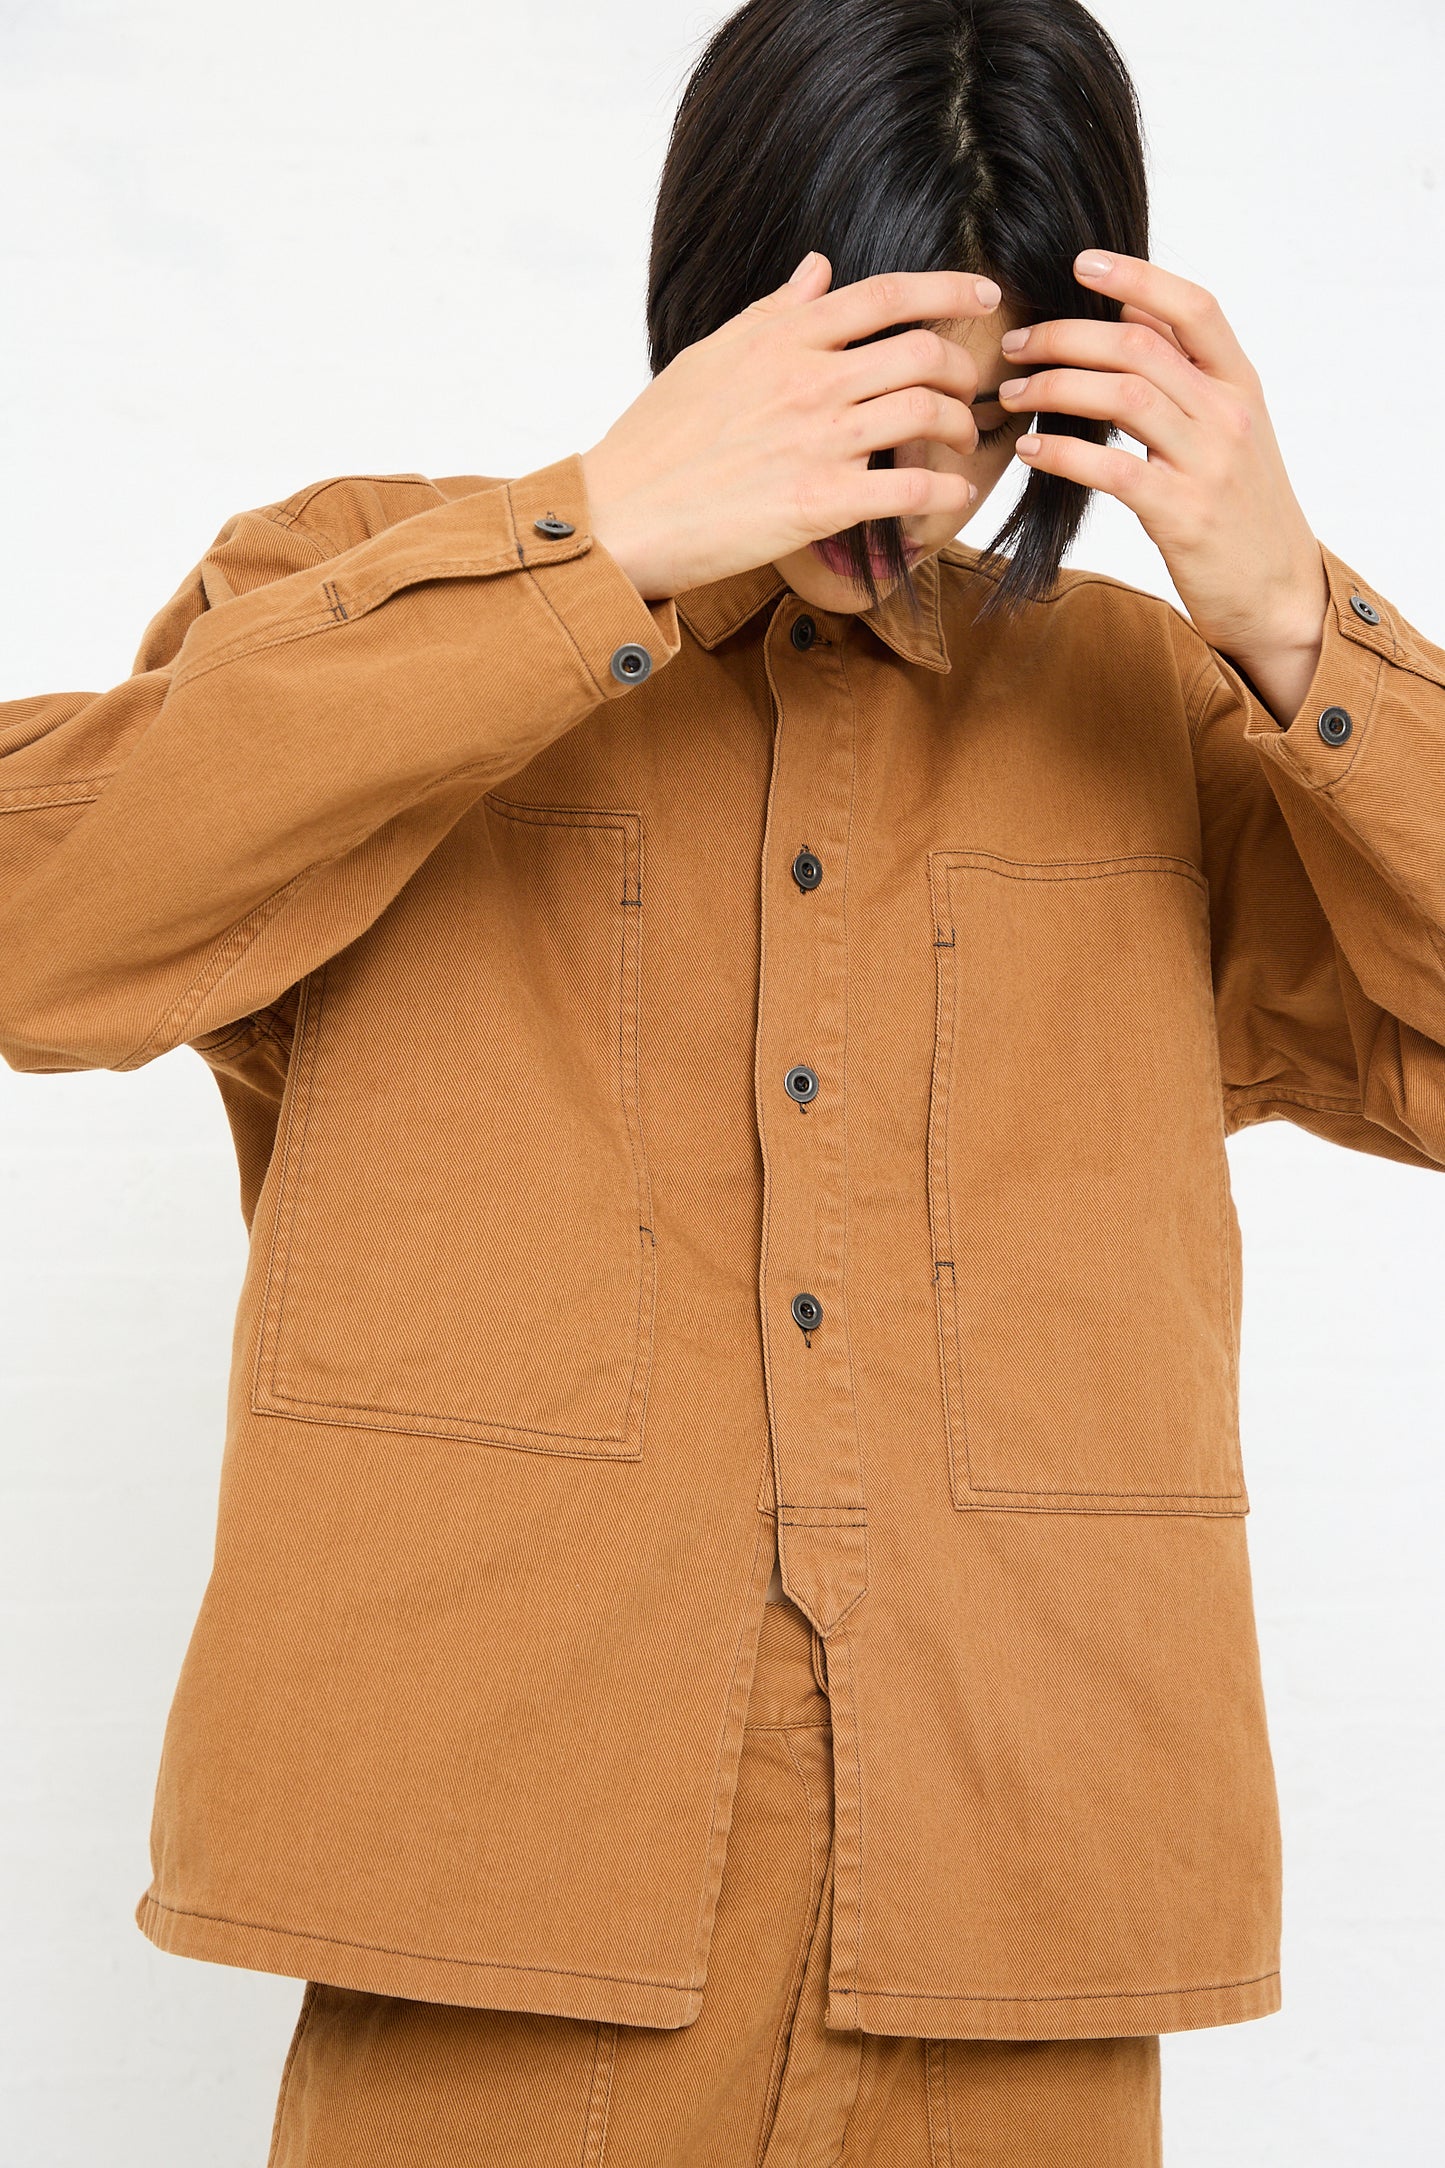 A person in a Chimala Unisex Classic Drill US Army Work Jacket in Camel covering their face with their hands.